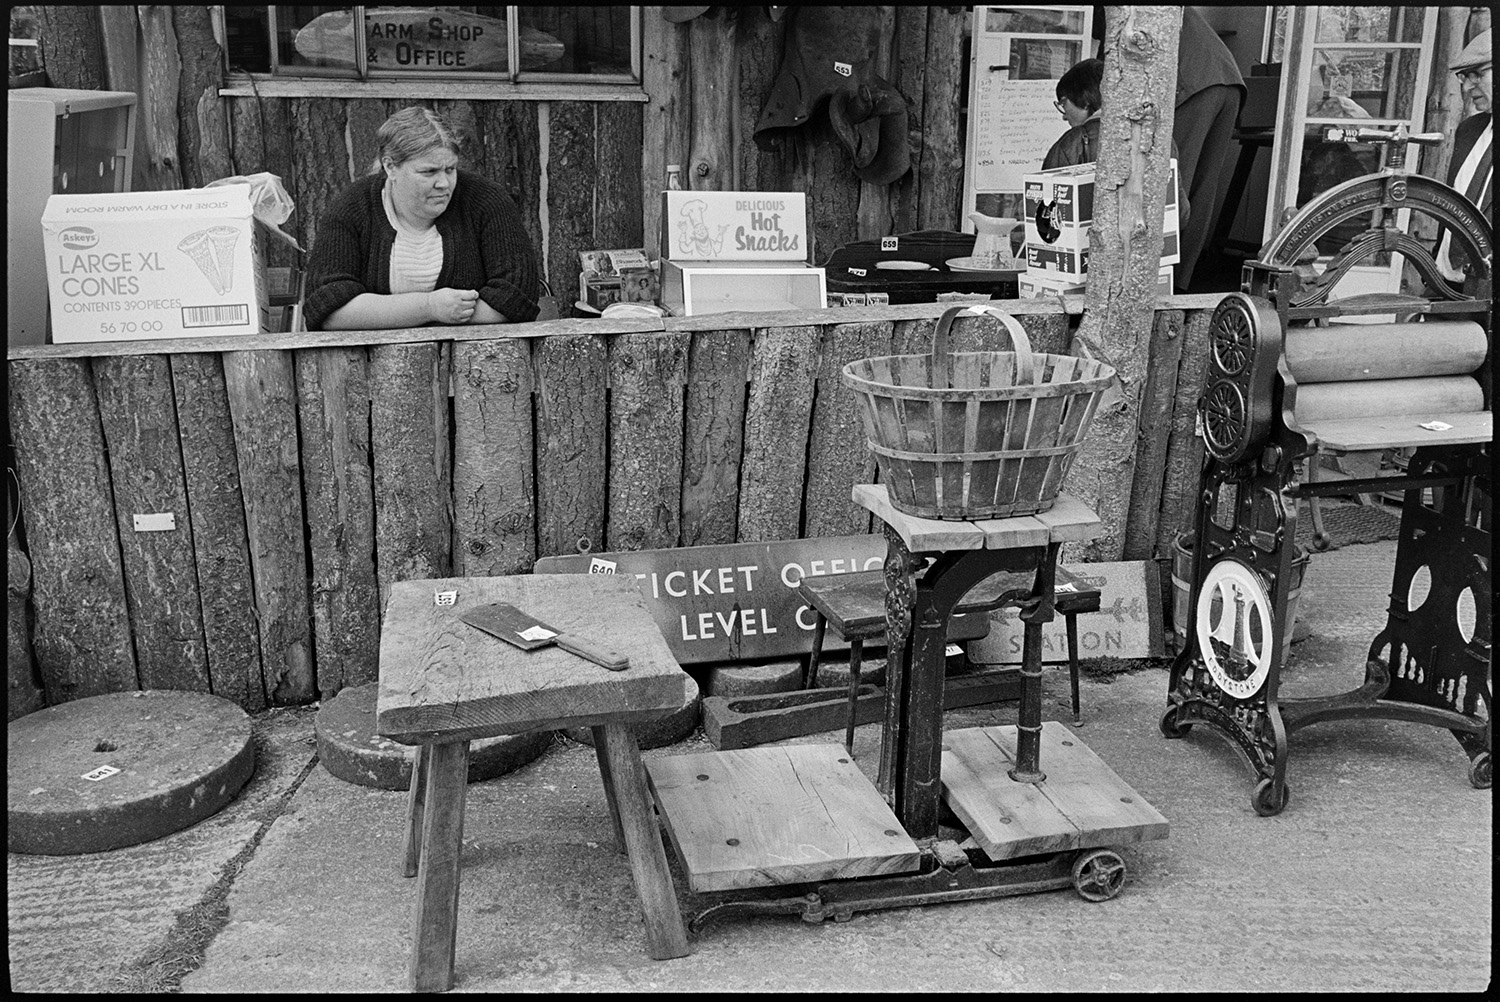 Sale of agricultural museum collection, signs, implements, machinery on display. Woodpile.
[A woman selling ice creams and hot snacks at a counter at the Ashley Collection, Hollocombe. In front of the counter are a number of items for sale, including grinding stones, a stool, trolley, basket, hand operated mangle or wringer and a railway Ticket Office sign.]